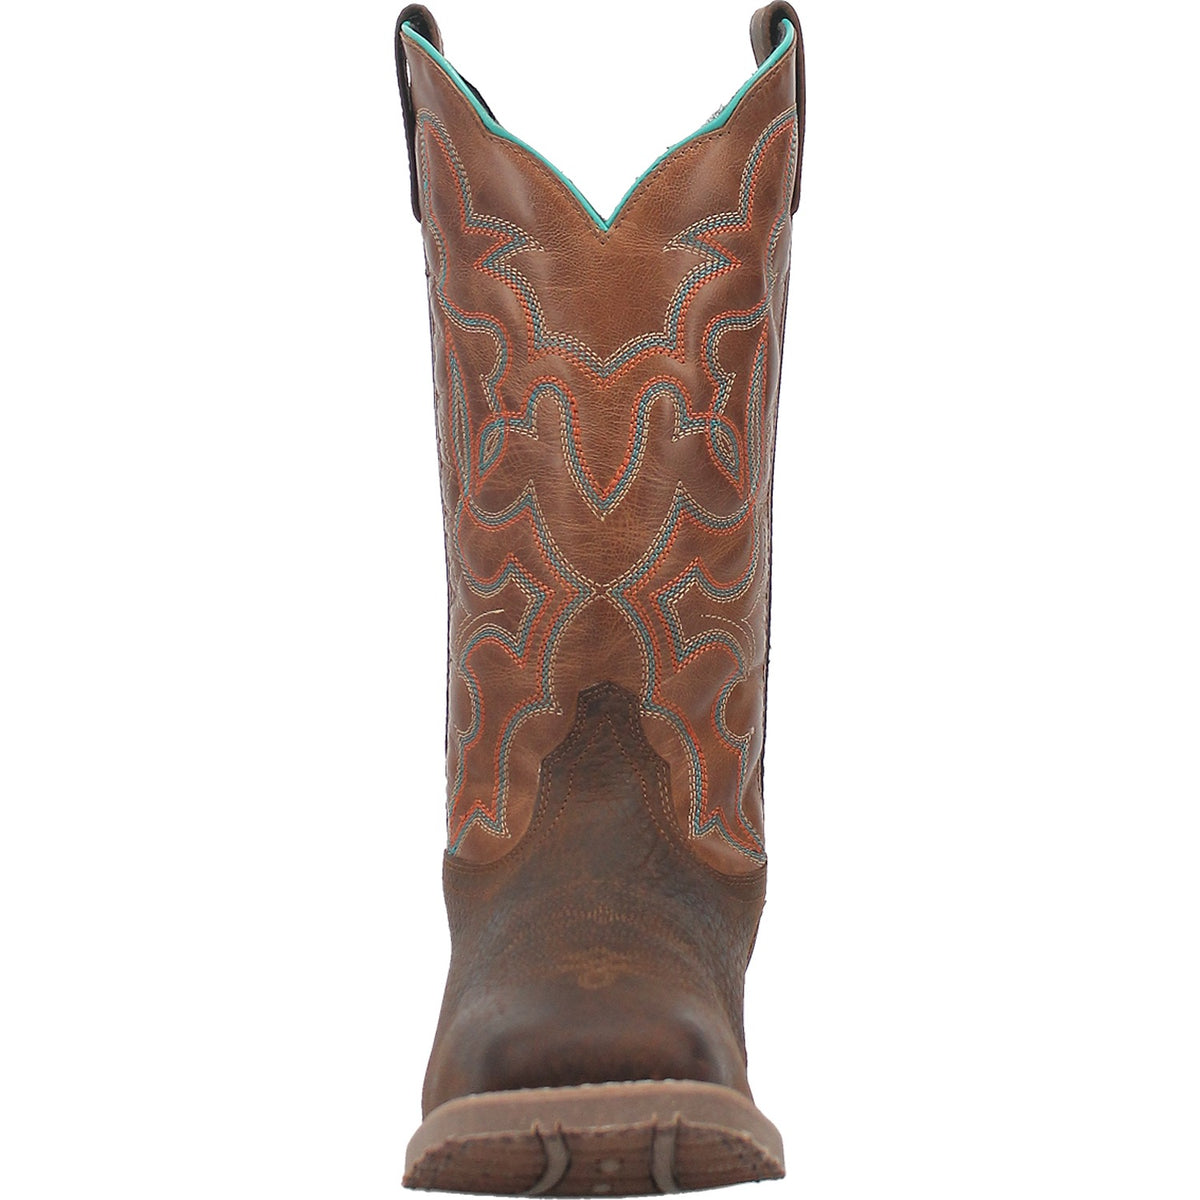 ODIE LEATHER BOOT Image